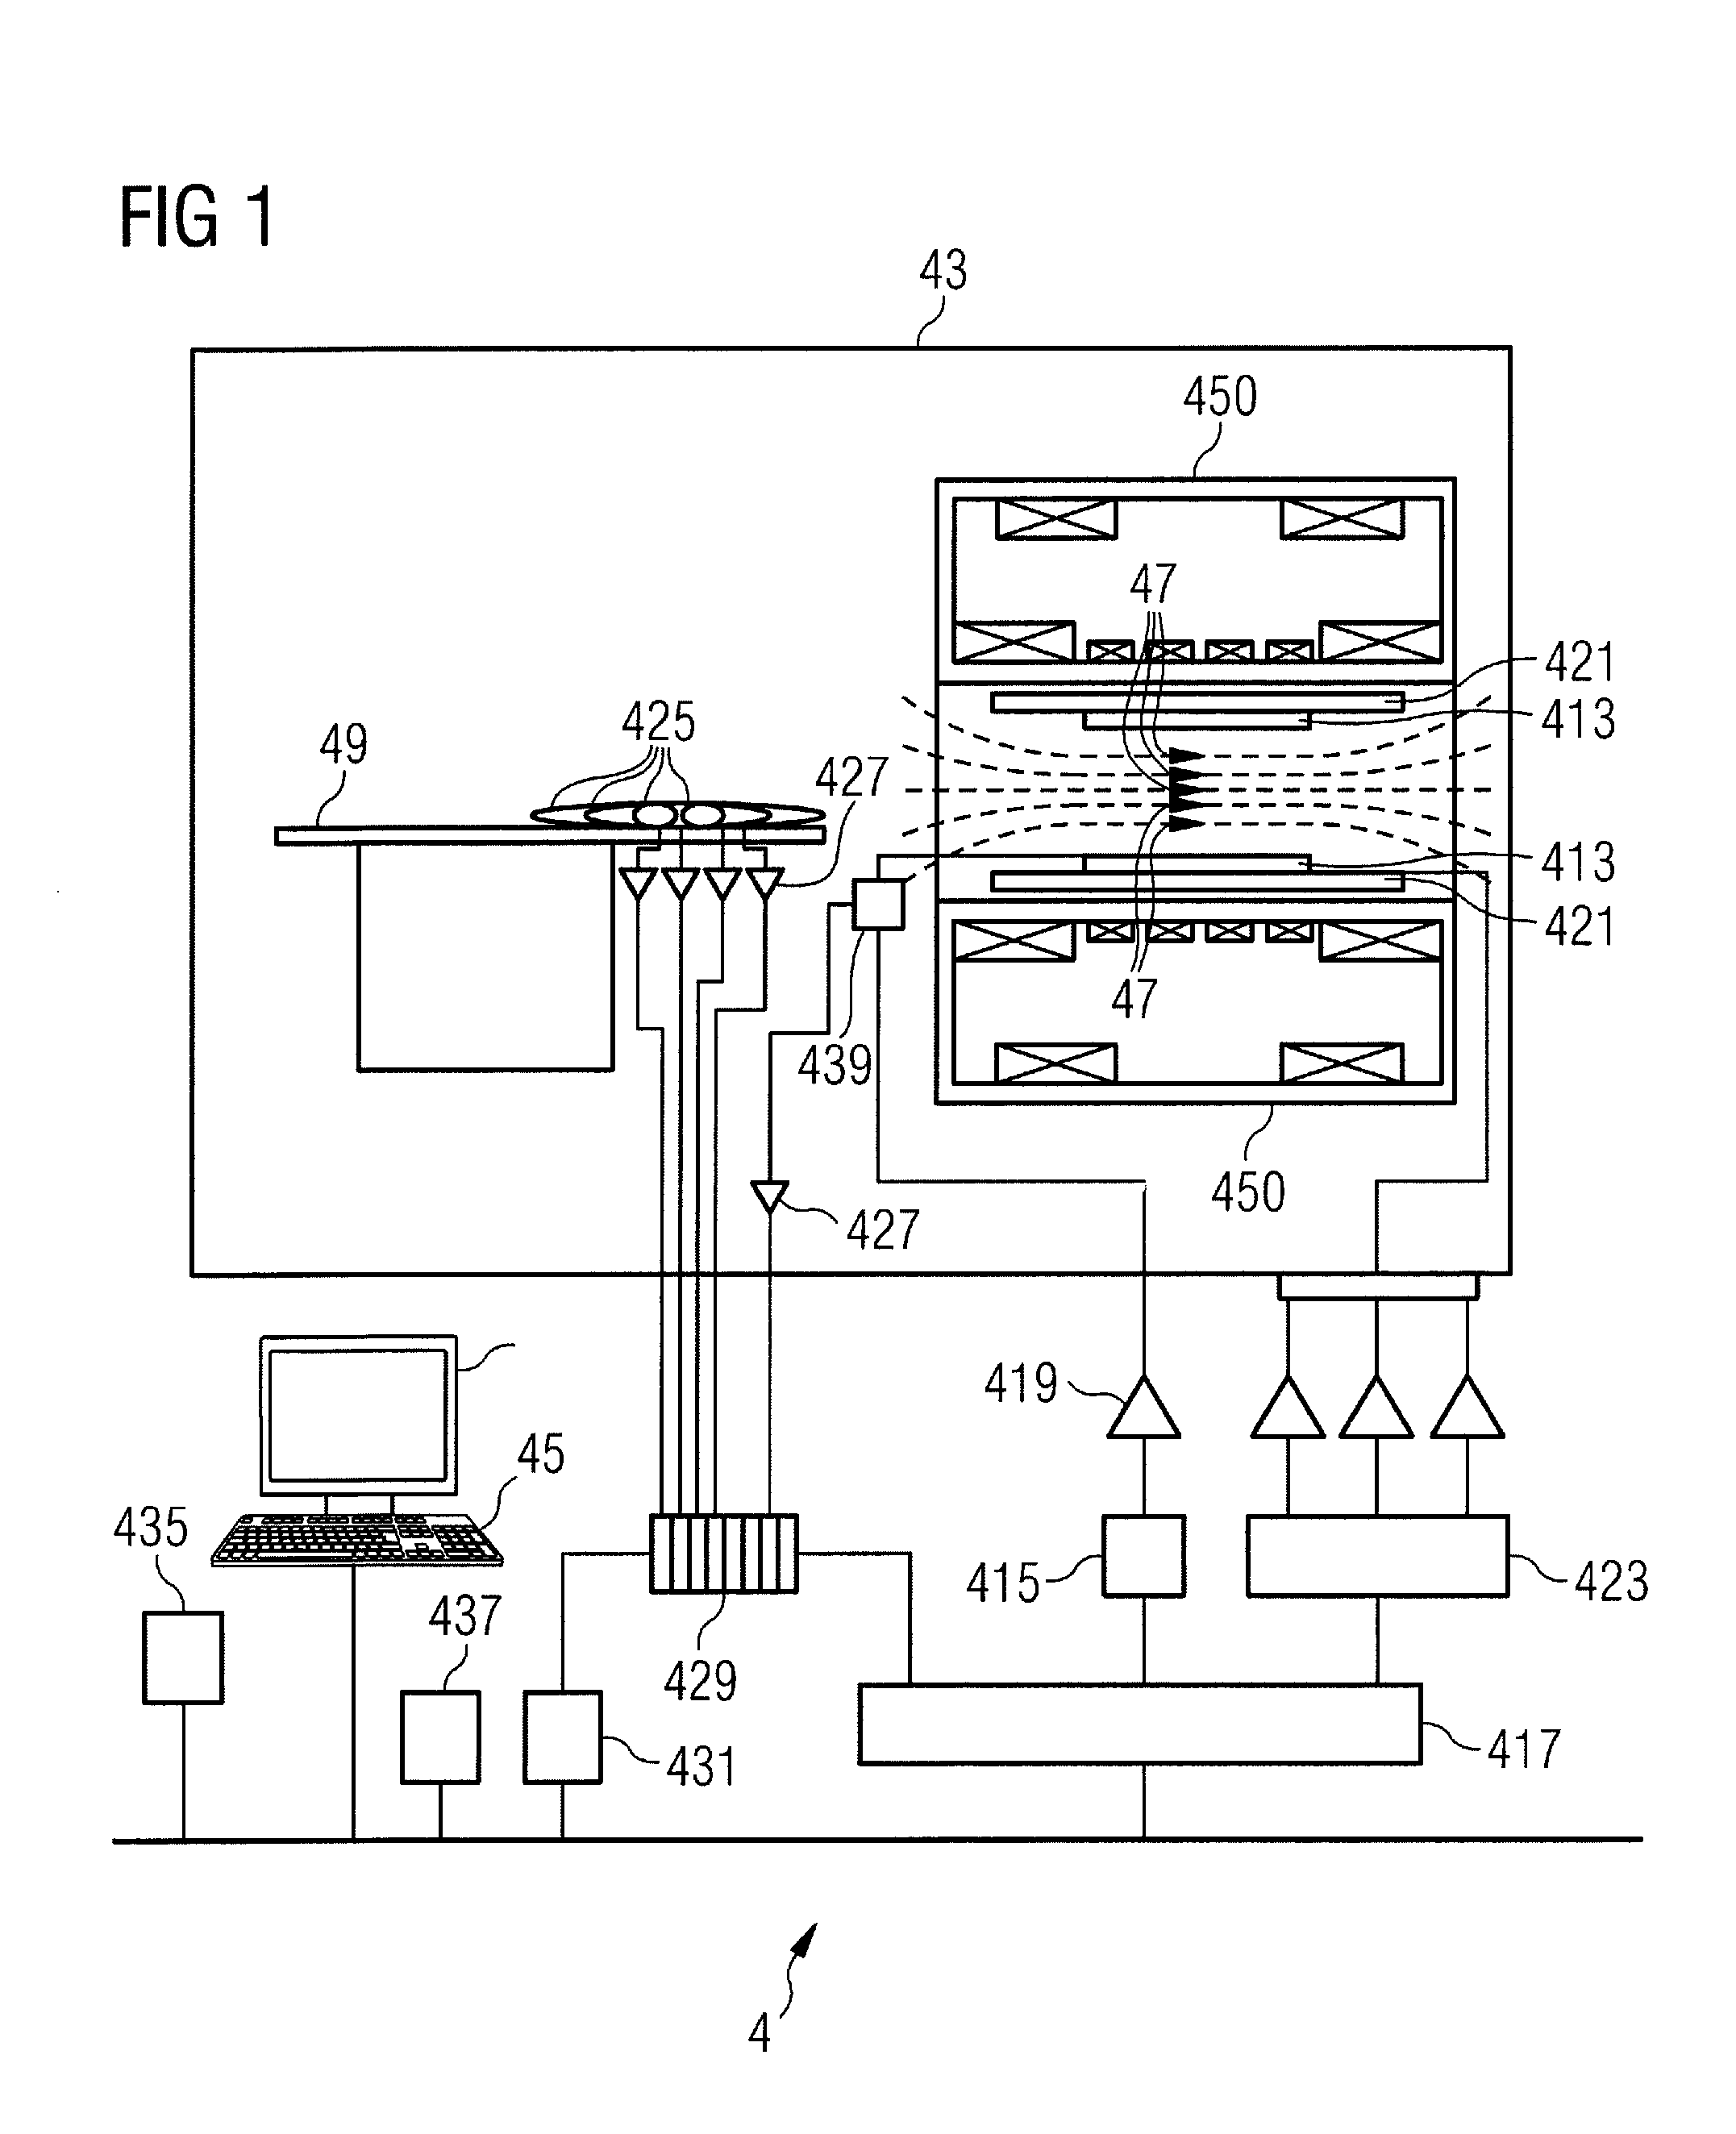 Method and device for automated generation of a formal description of a magnetic resonance system measurement sequence, using a sequence model